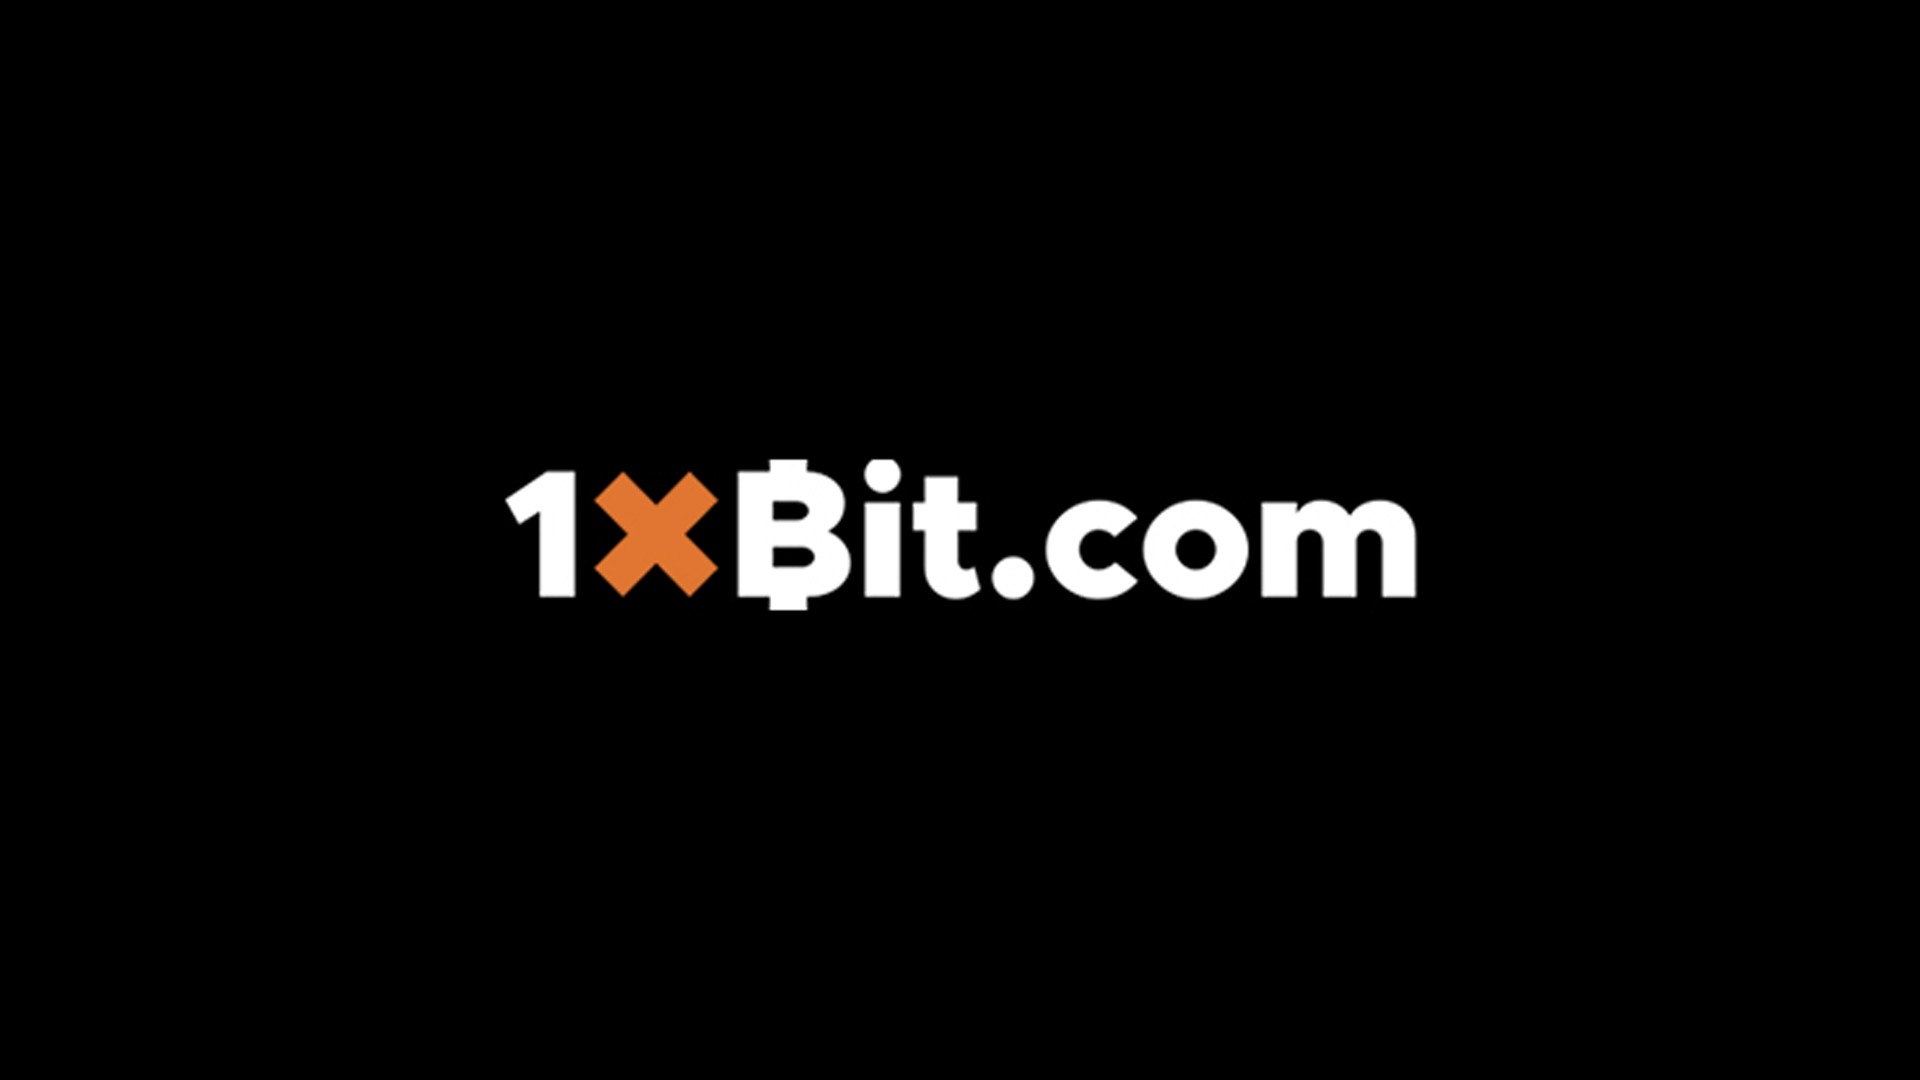 Best-bitcoin-gambling-sites-to-look-out-for-in-2023_0002_1xbit-min